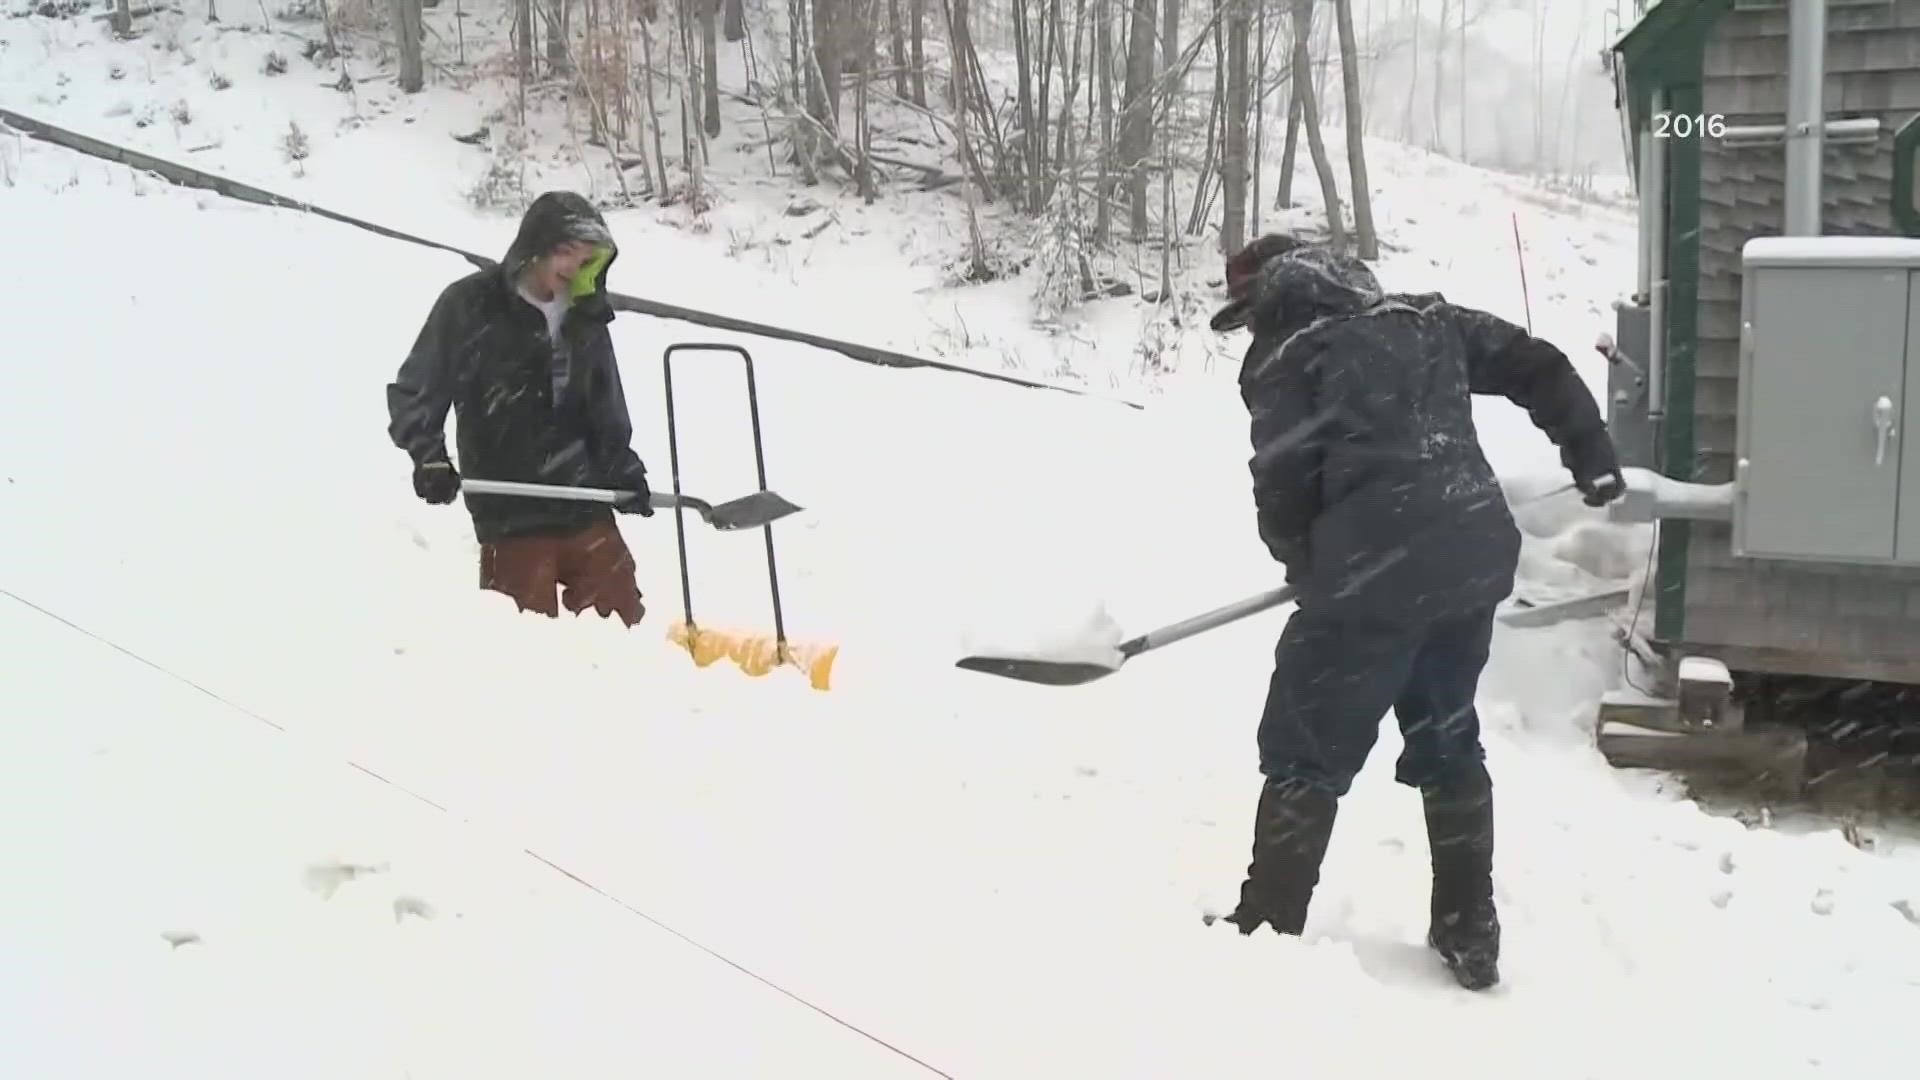 The toboggan competition takes place each year at the Camden Snow Bowl. This year, organizers had to re-engineer the chute that spills out on Hosmer Pond.